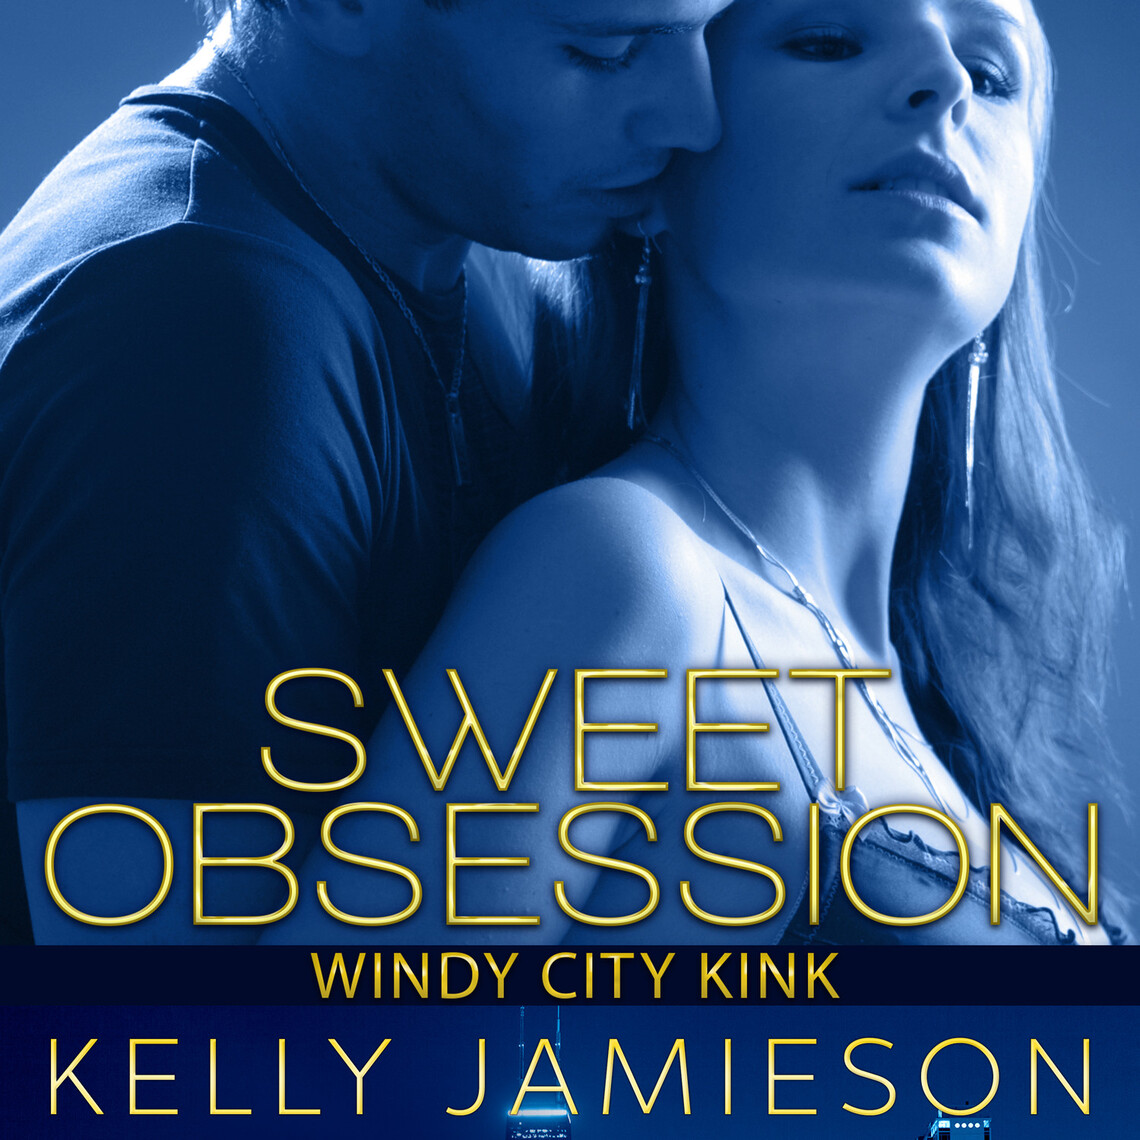 Sweet Obsession by Kelly Jamieson picture photo